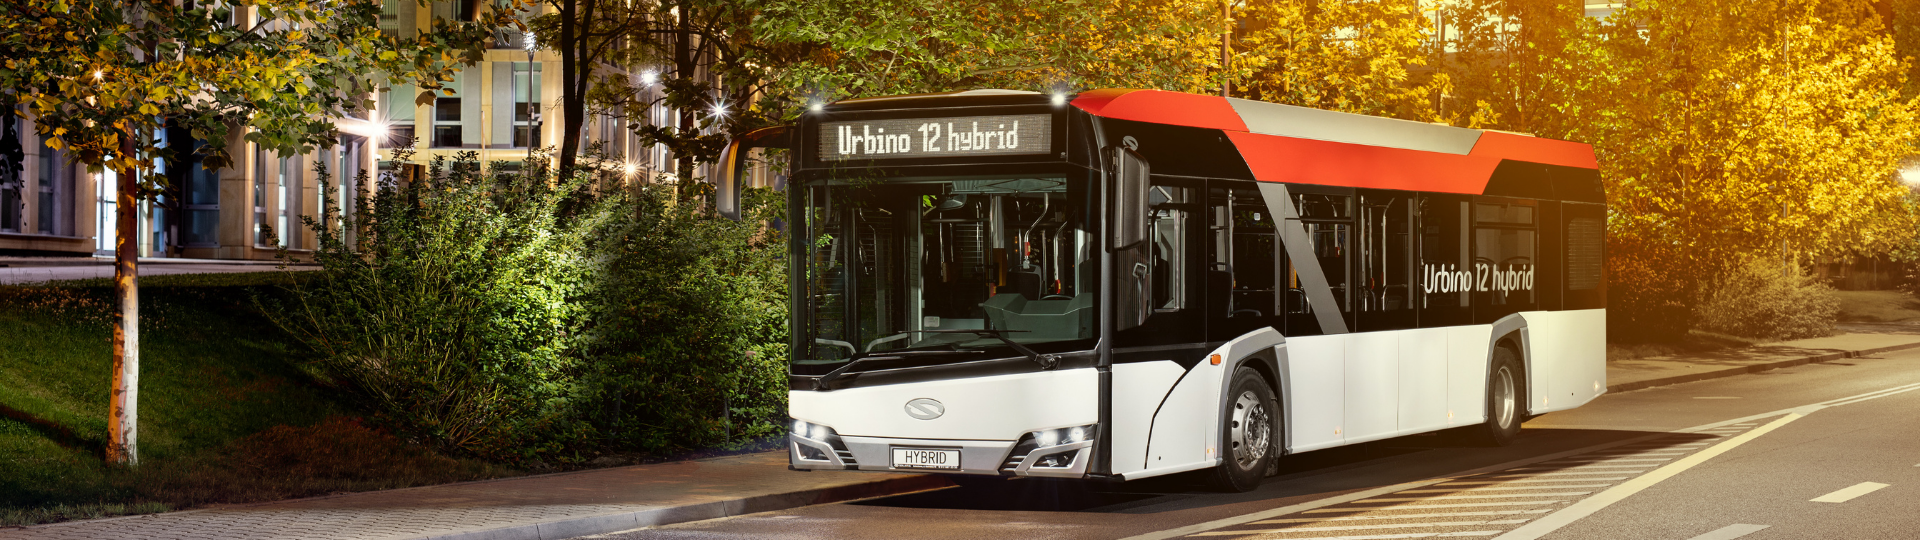 Solaris on the shortlist of suppliers to deliver up to 430 hybrid buses to operator OTW Namur in Belgium